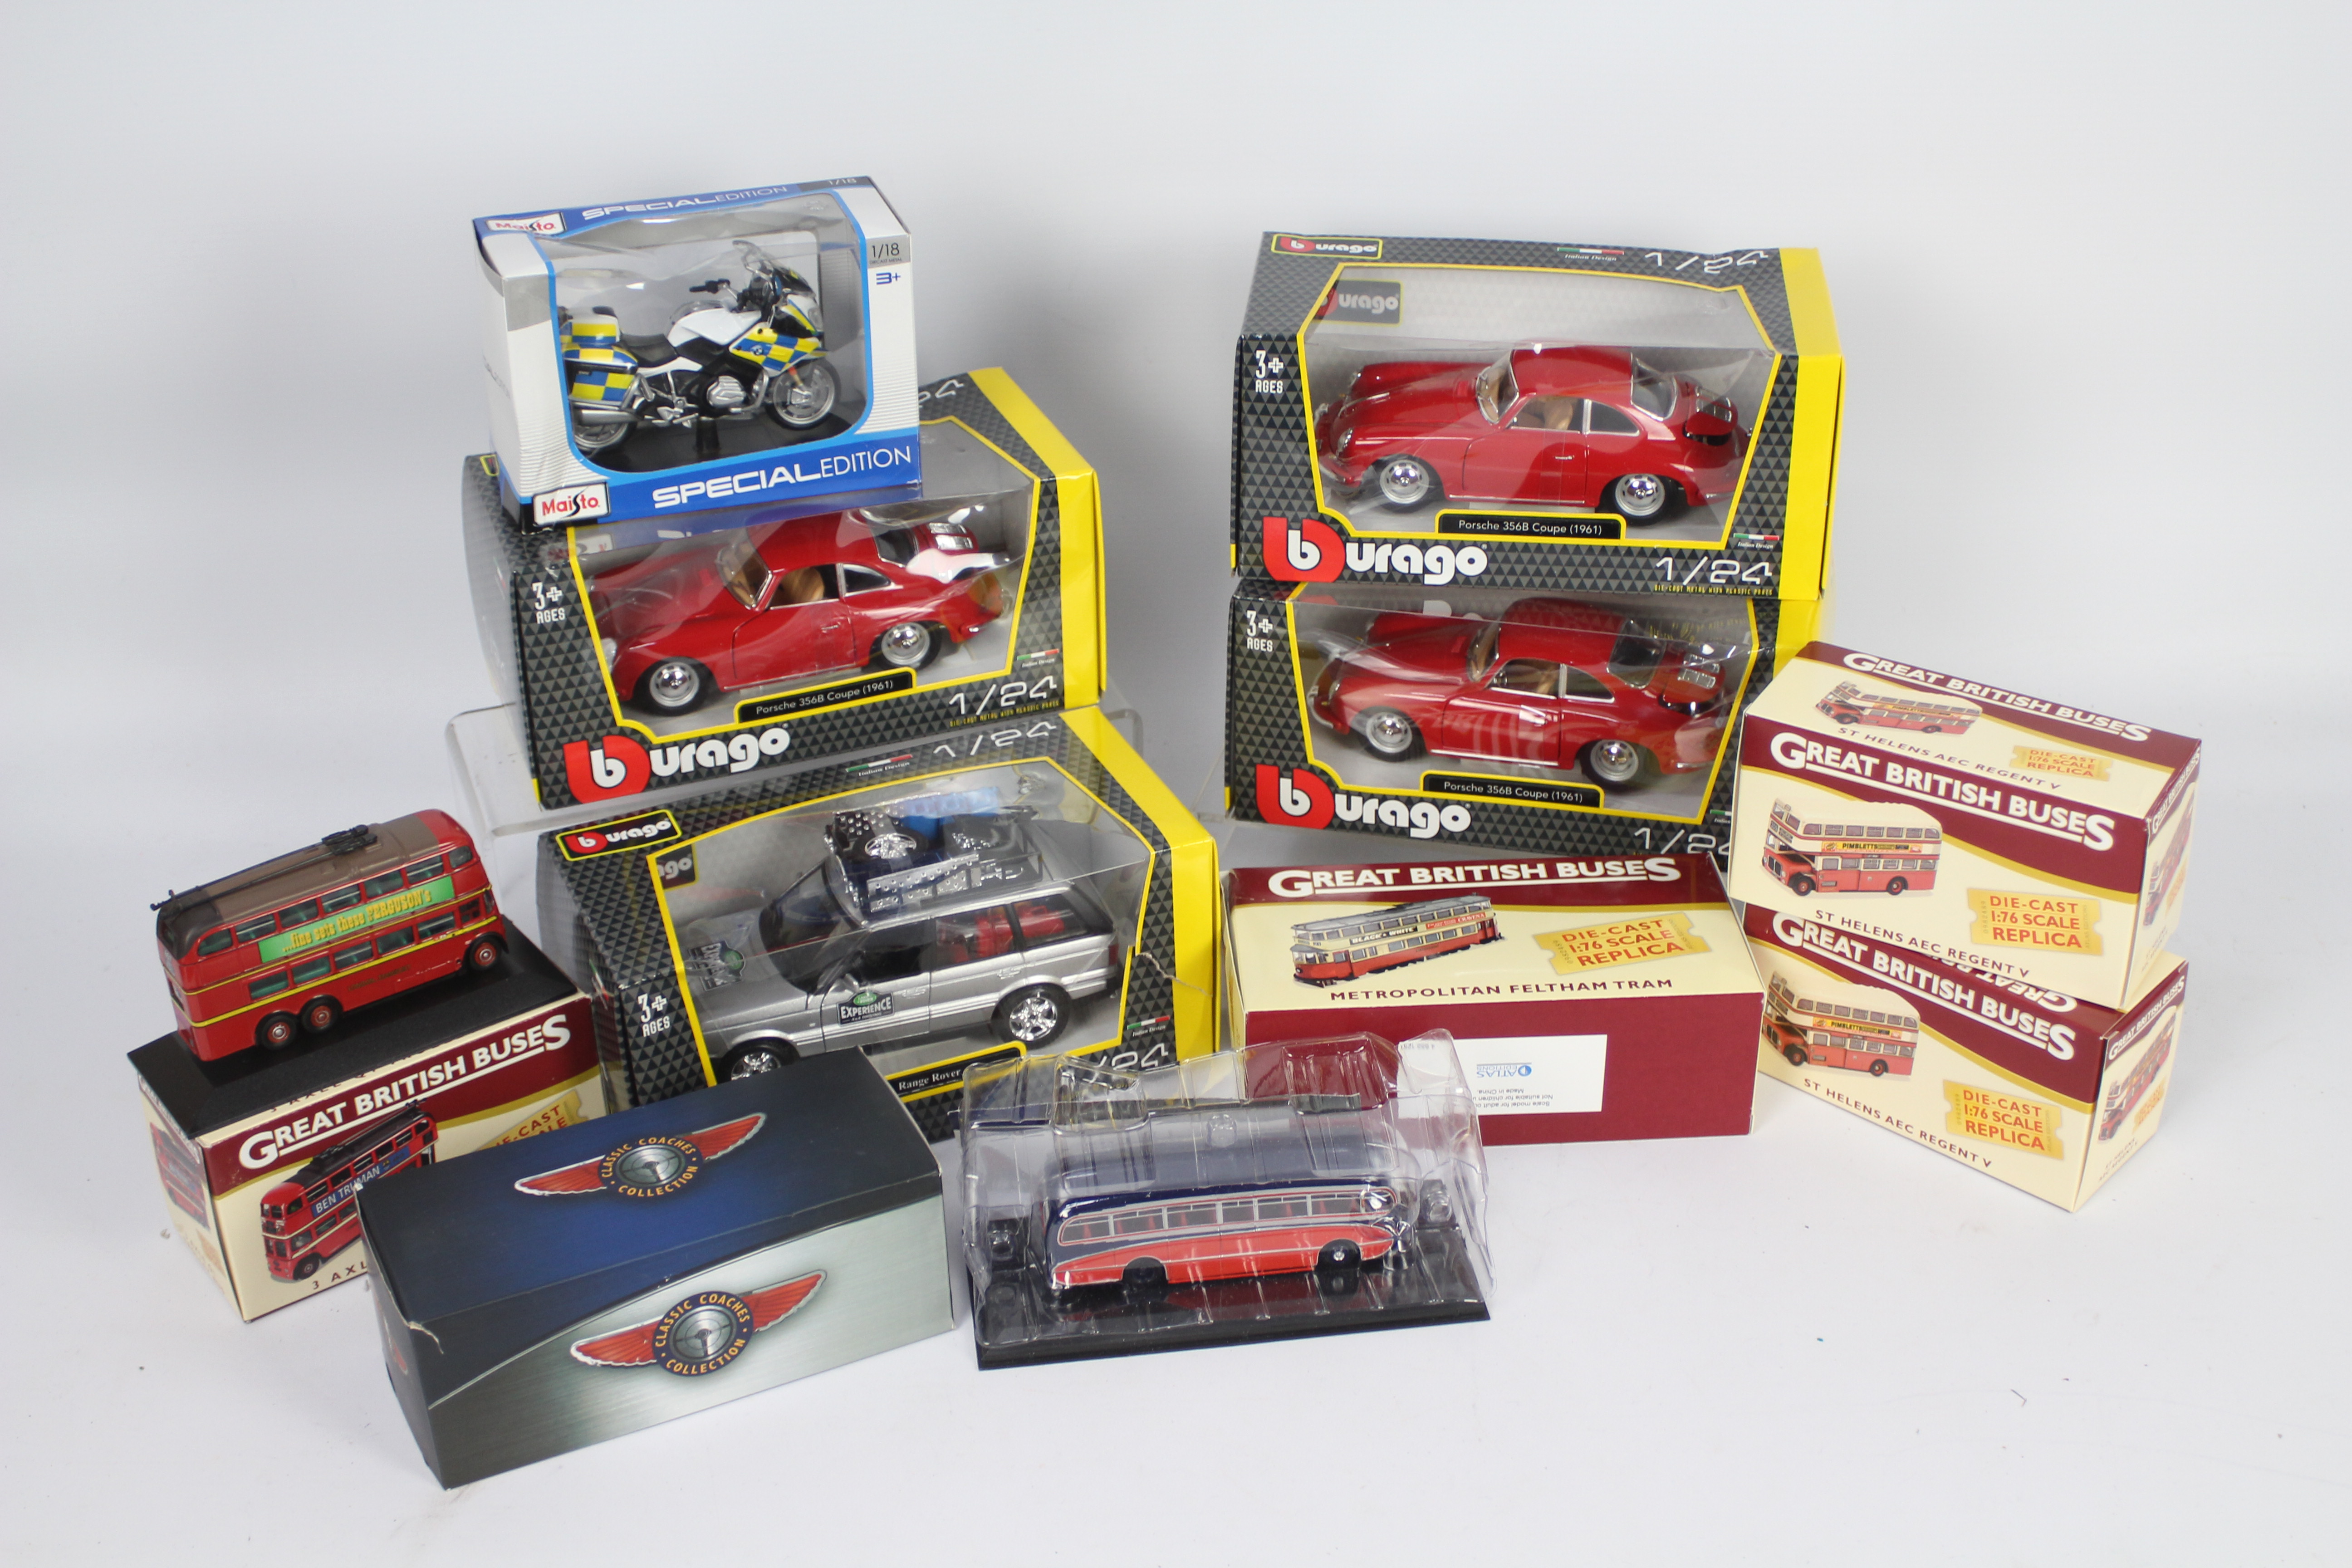 Bburago, Atlas Editions, Maisto - A boxed collection of 10 diecast model vehicles in various scales.